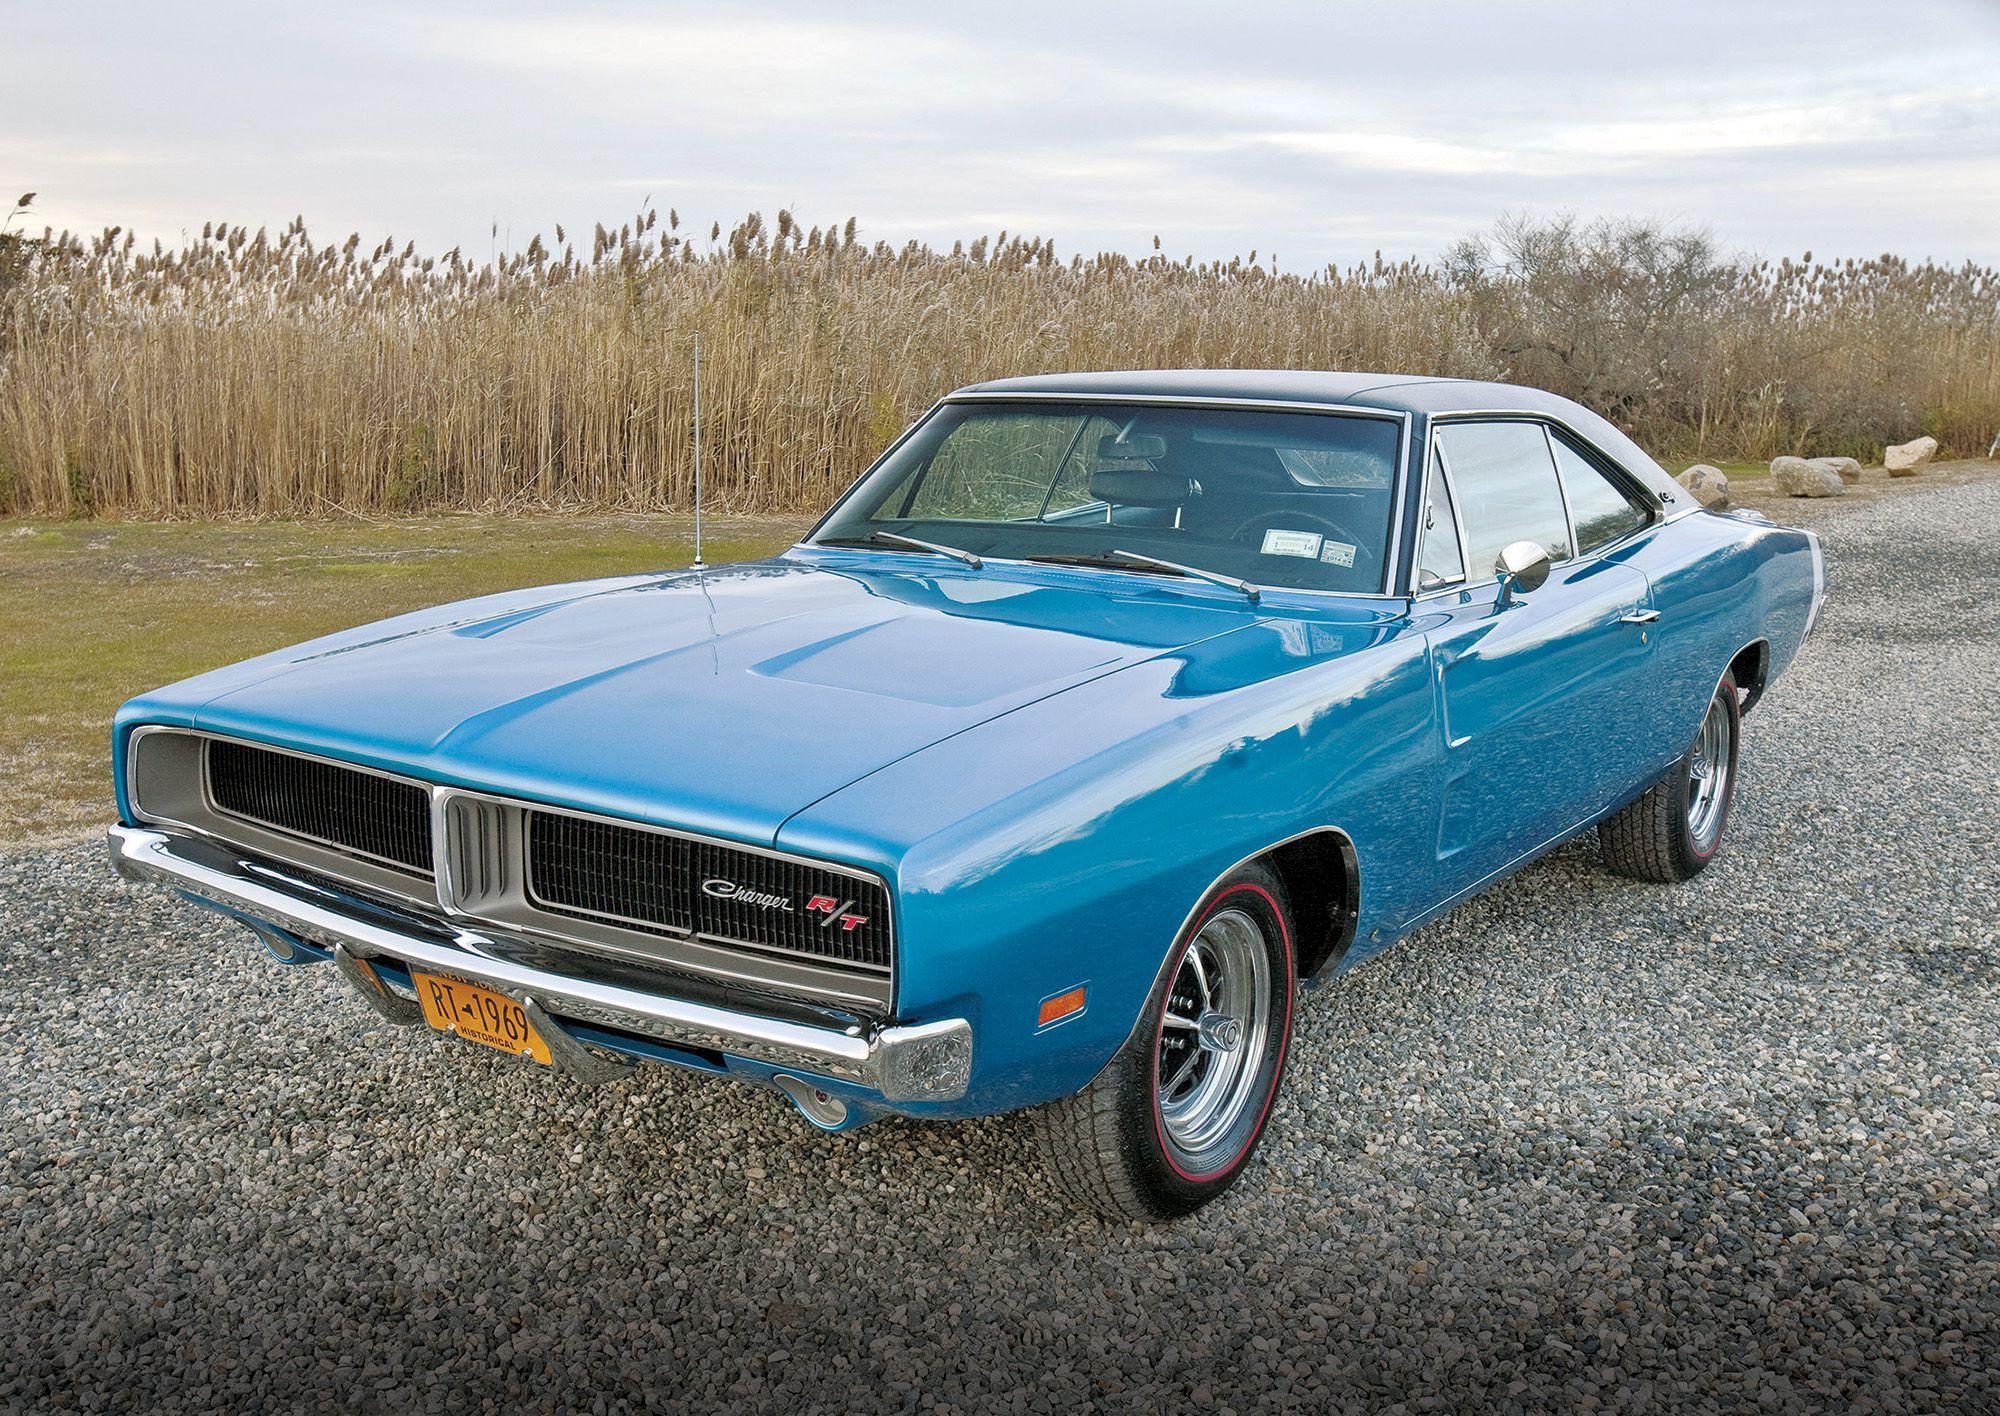 The Iconic 440-powered 1969 Dodge Charger R/T remains a solid investment